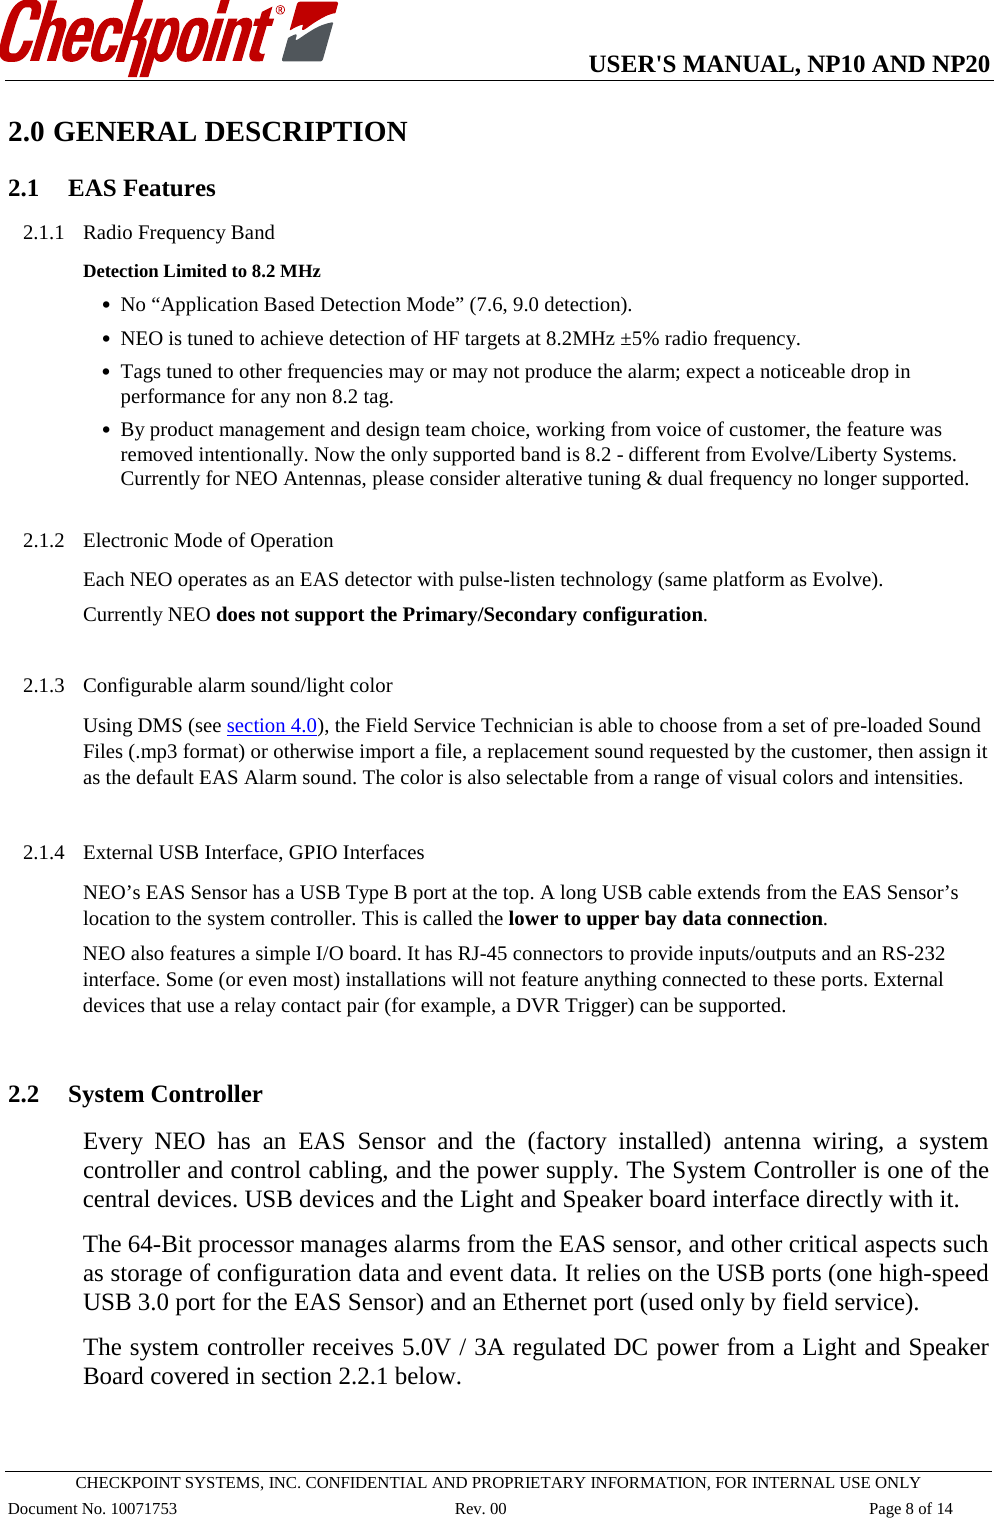   USER&apos;S MANUAL, NP10 AND NP20   CHECKPOINT SYSTEMS, INC. CONFIDENTIAL AND PROPRIETARY INFORMATION, FOR INTERNAL USE ONLY Document No. 10071753 Rev. 00 Page 8 of 14 2.0 GENERAL DESCRIPTION 2.1 EAS Features 2.1.1 Radio Frequency Band Detection Limited to 8.2 MHz  • No “Application Based Detection Mode” (7.6, 9.0 detection).  • NEO is tuned to achieve detection of HF targets at 8.2MHz ±5% radio frequency.  • Tags tuned to other frequencies may or may not produce the alarm; expect a noticeable drop in performance for any non 8.2 tag. • By product management and design team choice, working from voice of customer, the feature was removed intentionally. Now the only supported band is 8.2 - different from Evolve/Liberty Systems. Currently for NEO Antennas, please consider alterative tuning &amp; dual frequency no longer supported.  2.1.2 Electronic Mode of Operation Each NEO operates as an EAS detector with pulse-listen technology (same platform as Evolve). Currently NEO does not support the Primary/Secondary configuration.  2.1.3 Configurable alarm sound/light color Using DMS (see section 4.0), the Field Service Technician is able to choose from a set of pre-loaded Sound Files (.mp3 format) or otherwise import a file, a replacement sound requested by the customer, then assign it as the default EAS Alarm sound. The color is also selectable from a range of visual colors and intensities.   2.1.4 External USB Interface, GPIO Interfaces NEO’s EAS Sensor has a USB Type B port at the top. A long USB cable extends from the EAS Sensor’s location to the system controller. This is called the lower to upper bay data connection. NEO also features a simple I/O board. It has RJ-45 connectors to provide inputs/outputs and an RS-232 interface. Some (or even most) installations will not feature anything connected to these ports. External devices that use a relay contact pair (for example, a DVR Trigger) can be supported.  2.2 System Controller Every NEO has an EAS Sensor and the (factory installed) antenna wiring, a system controller and control cabling, and the power supply. The System Controller is one of the central devices. USB devices and the Light and Speaker board interface directly with it.  The 64-Bit processor manages alarms from the EAS sensor, and other critical aspects such as storage of configuration data and event data. It relies on the USB ports (one high-speed USB 3.0 port for the EAS Sensor) and an Ethernet port (used only by field service). The system controller receives 5.0V / 3A regulated DC power from a Light and Speaker Board covered in section 2.2.1 below.  